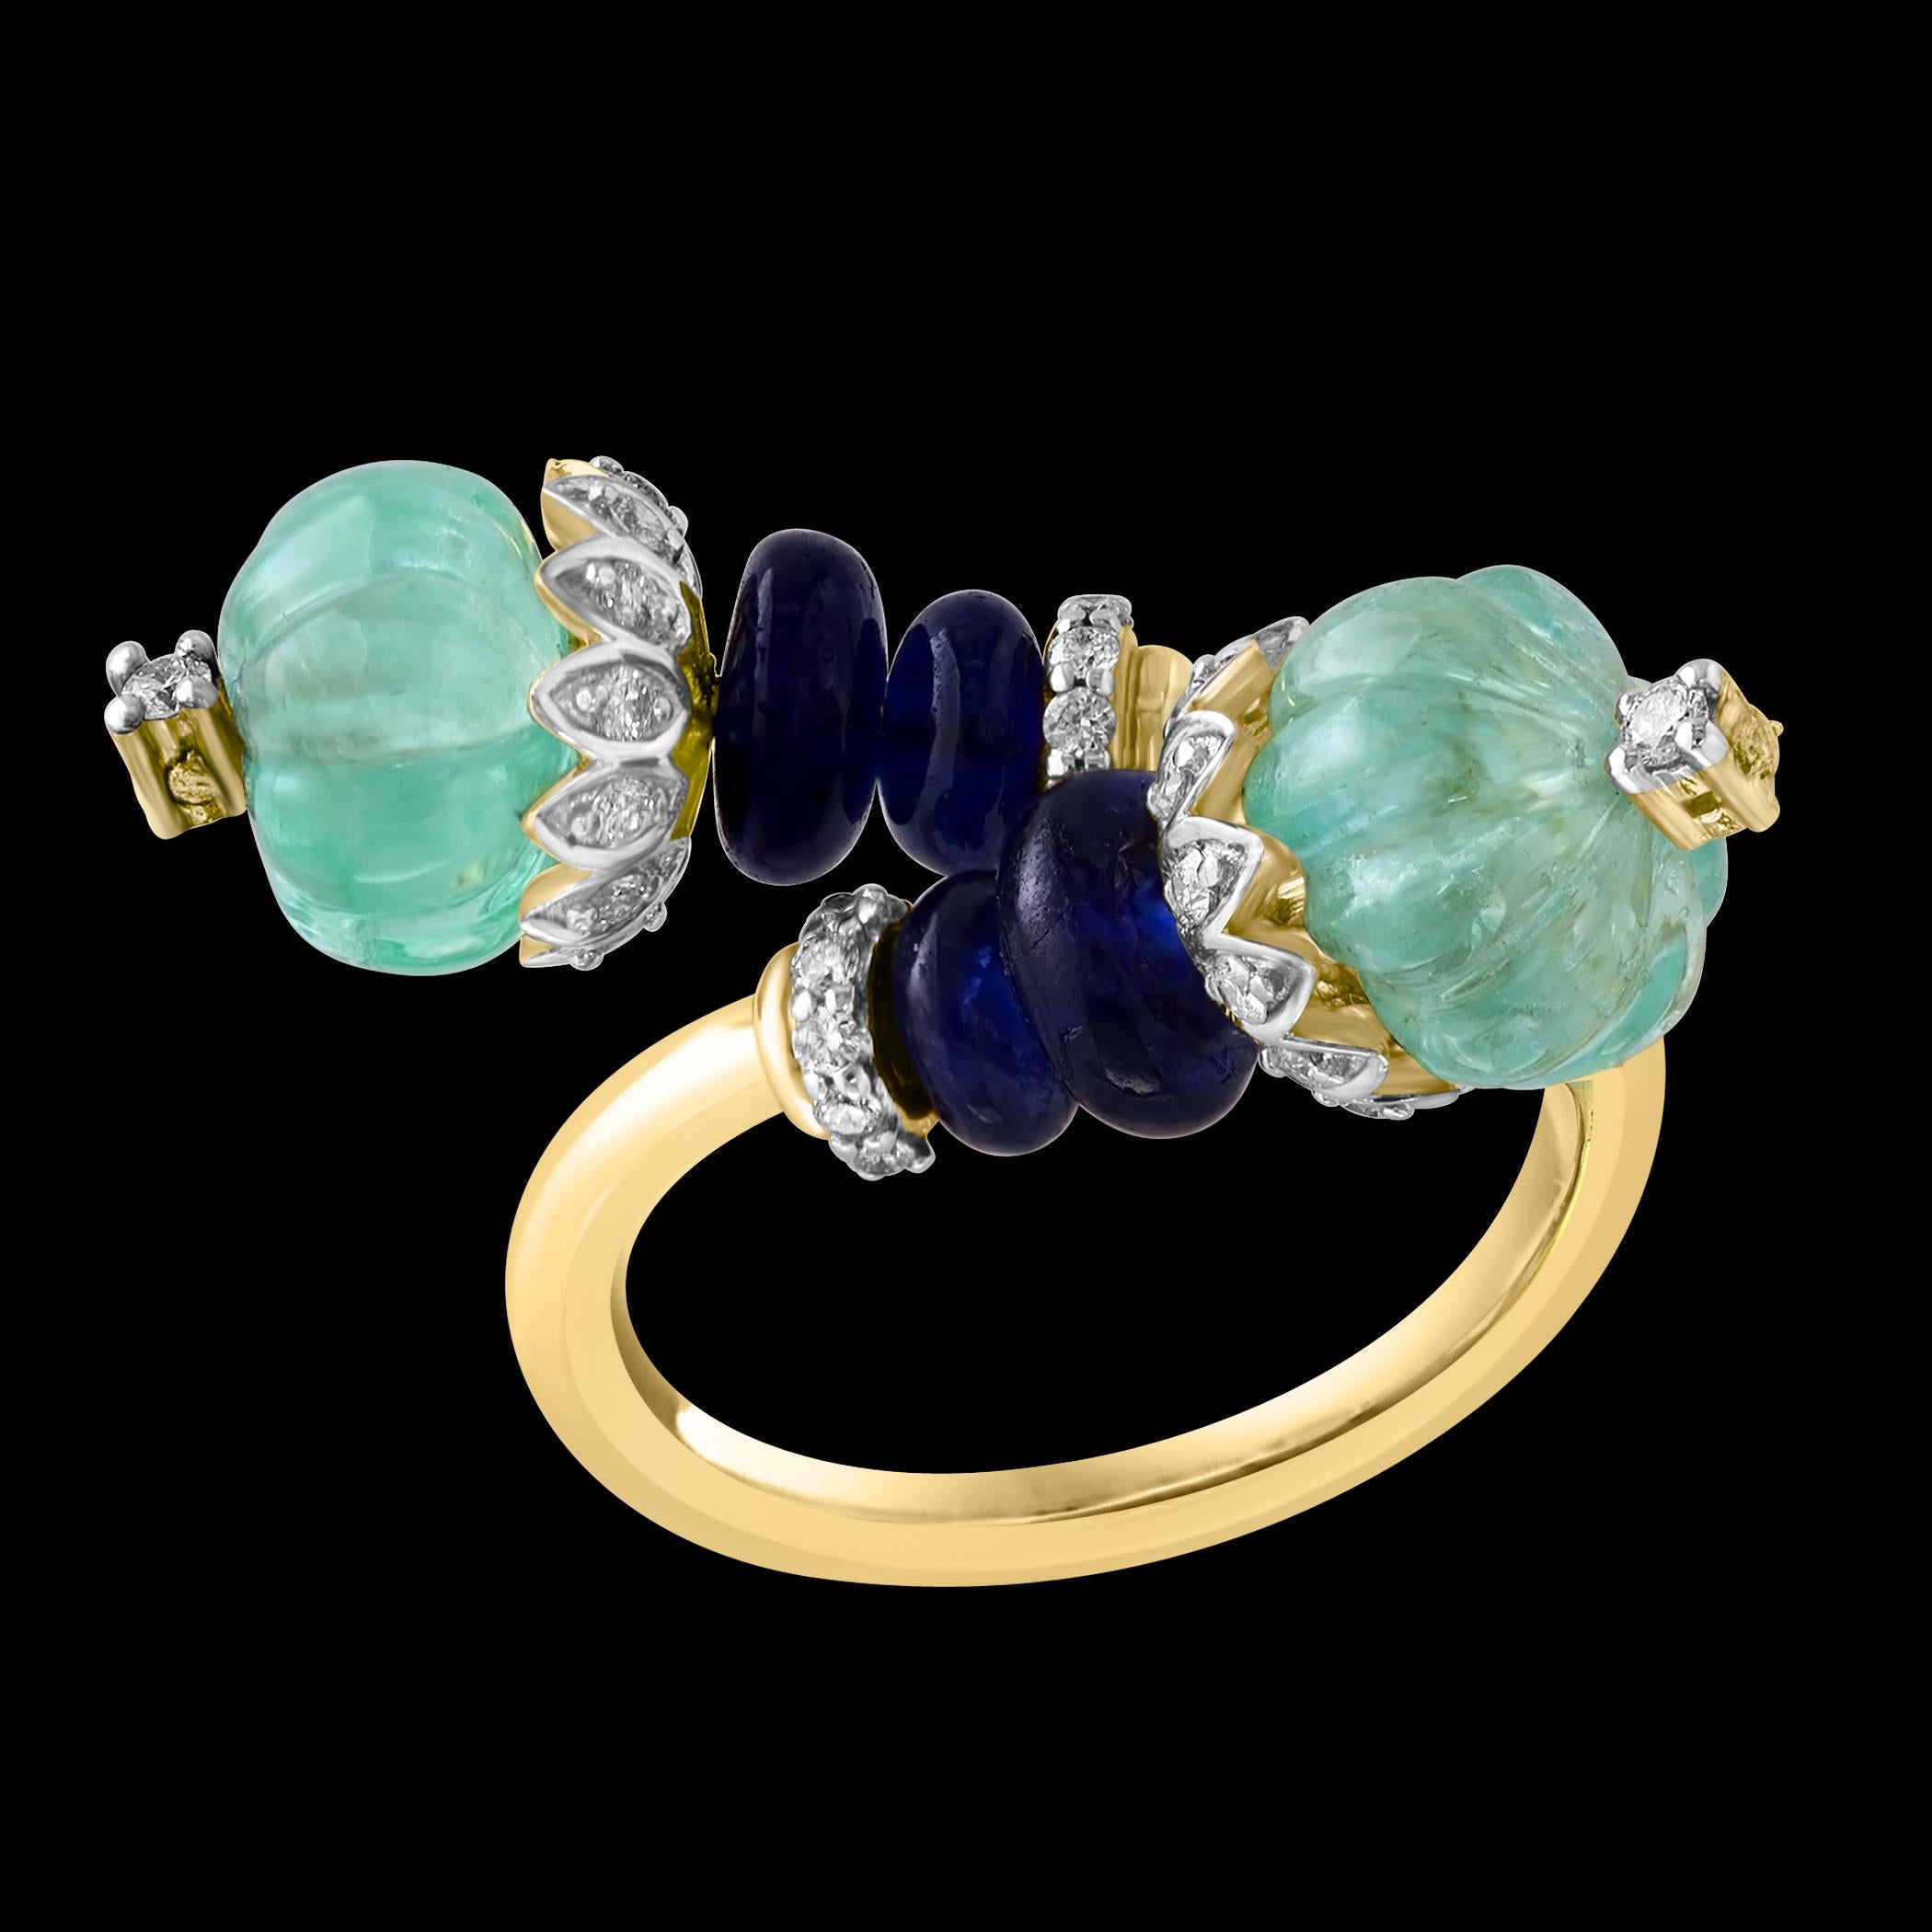 5 Ct Emerald Bead & 2.5 Ct Sapphire Beads & Diamond Ring in 18 Kt Gold Size 5 In Excellent Condition In New York, NY